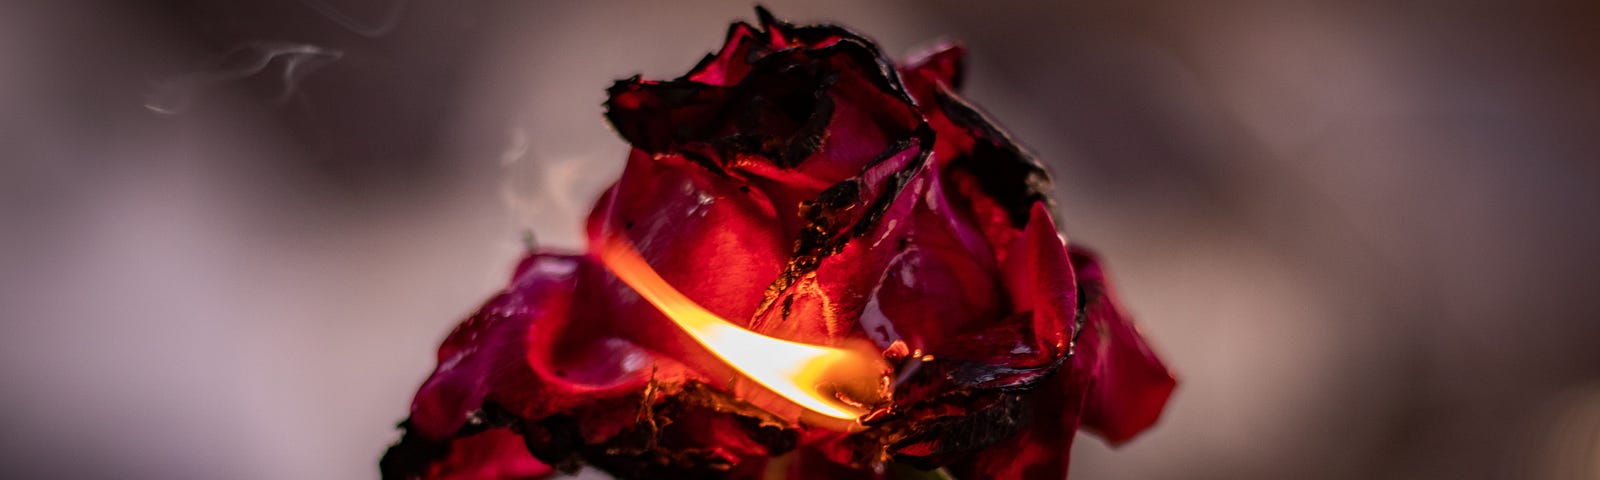 Close up photo of a red rose on fire.